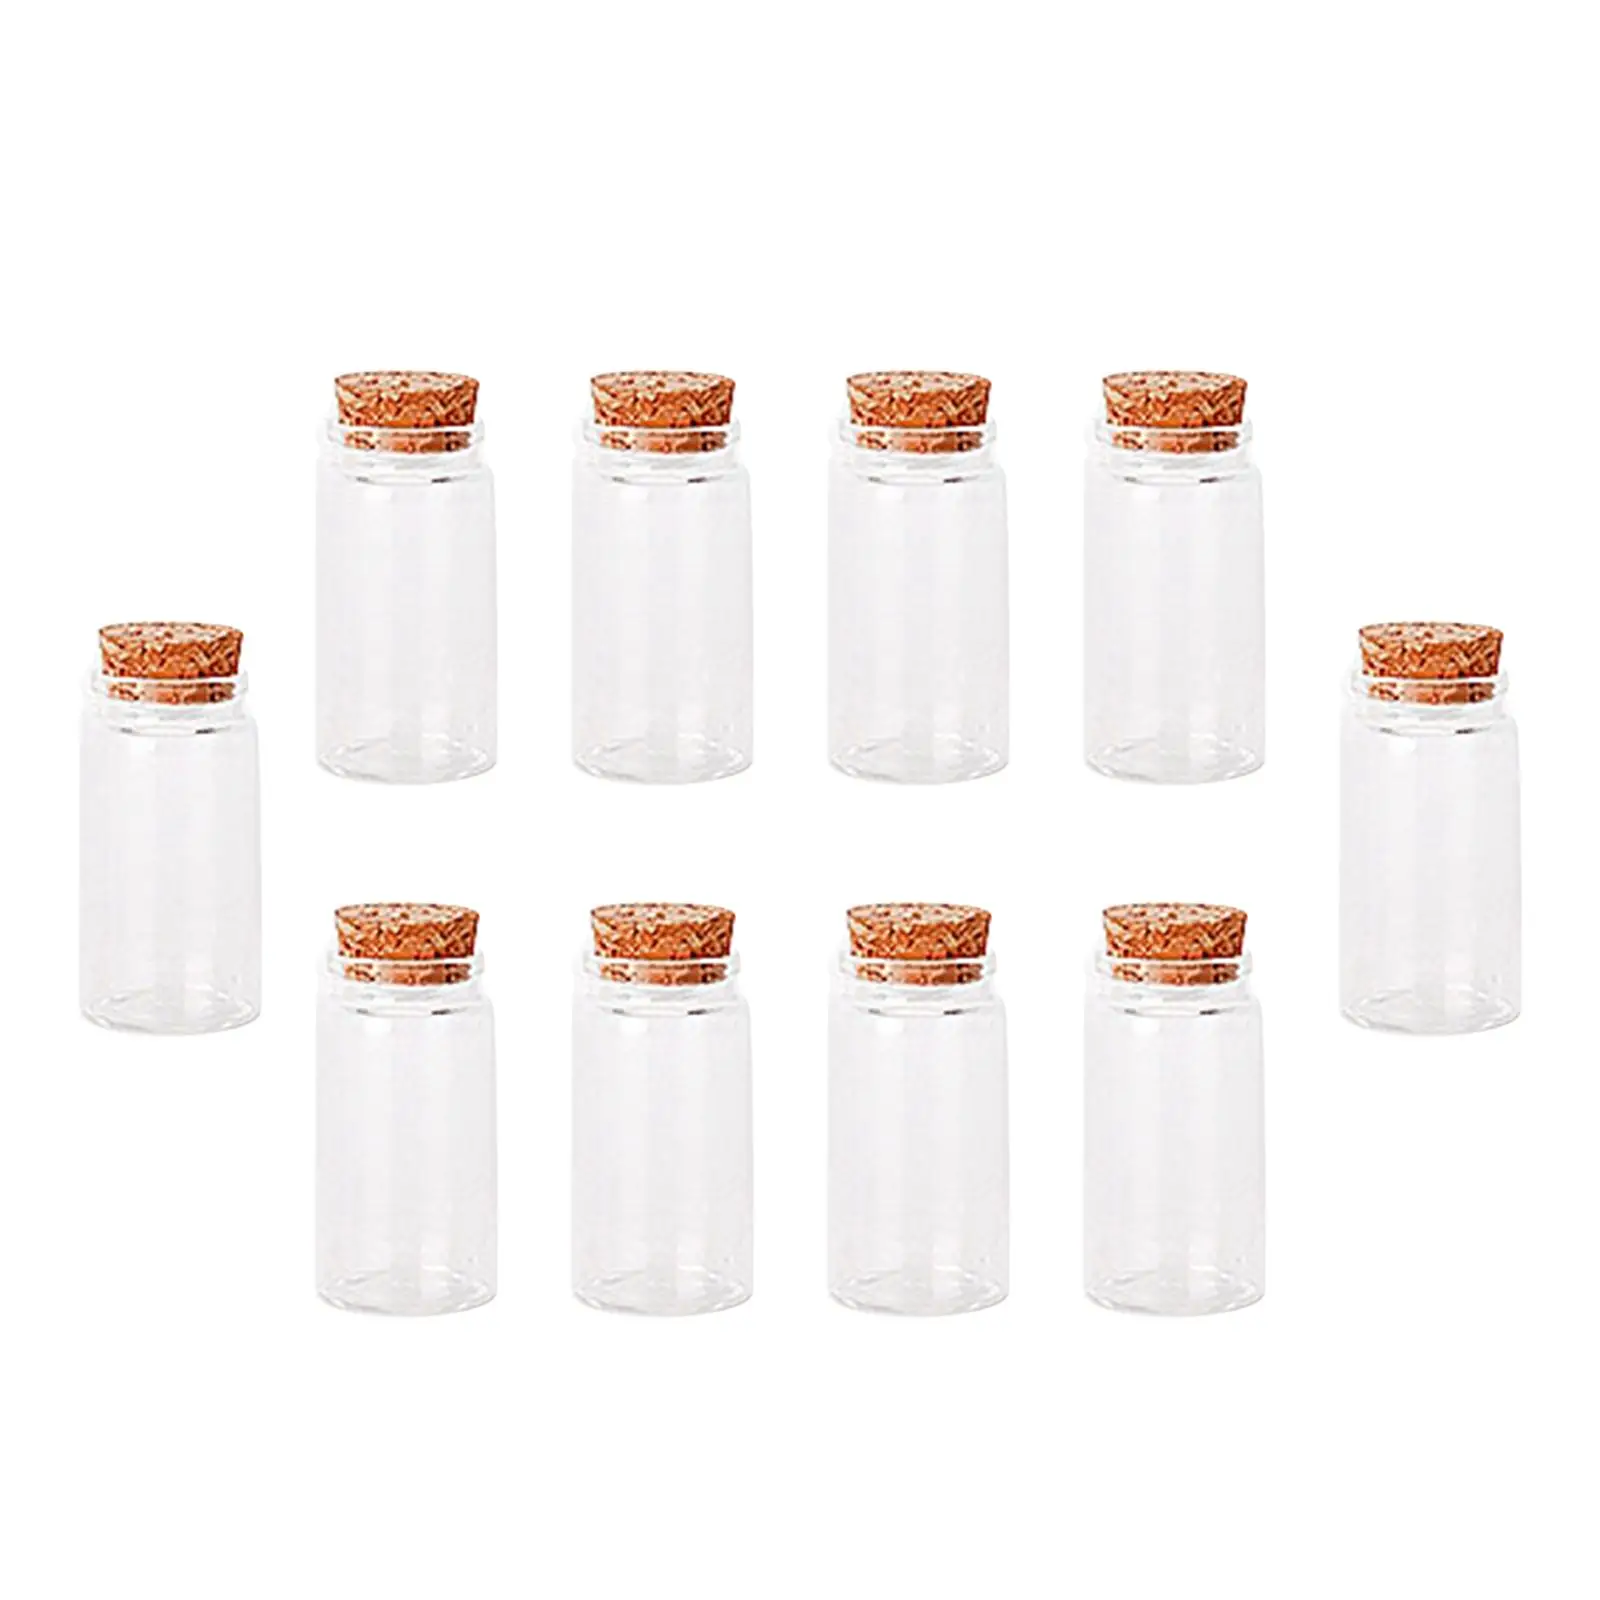 10 Pieces Wish Glass Jars Empty Container Candy Jars for Home Decoration